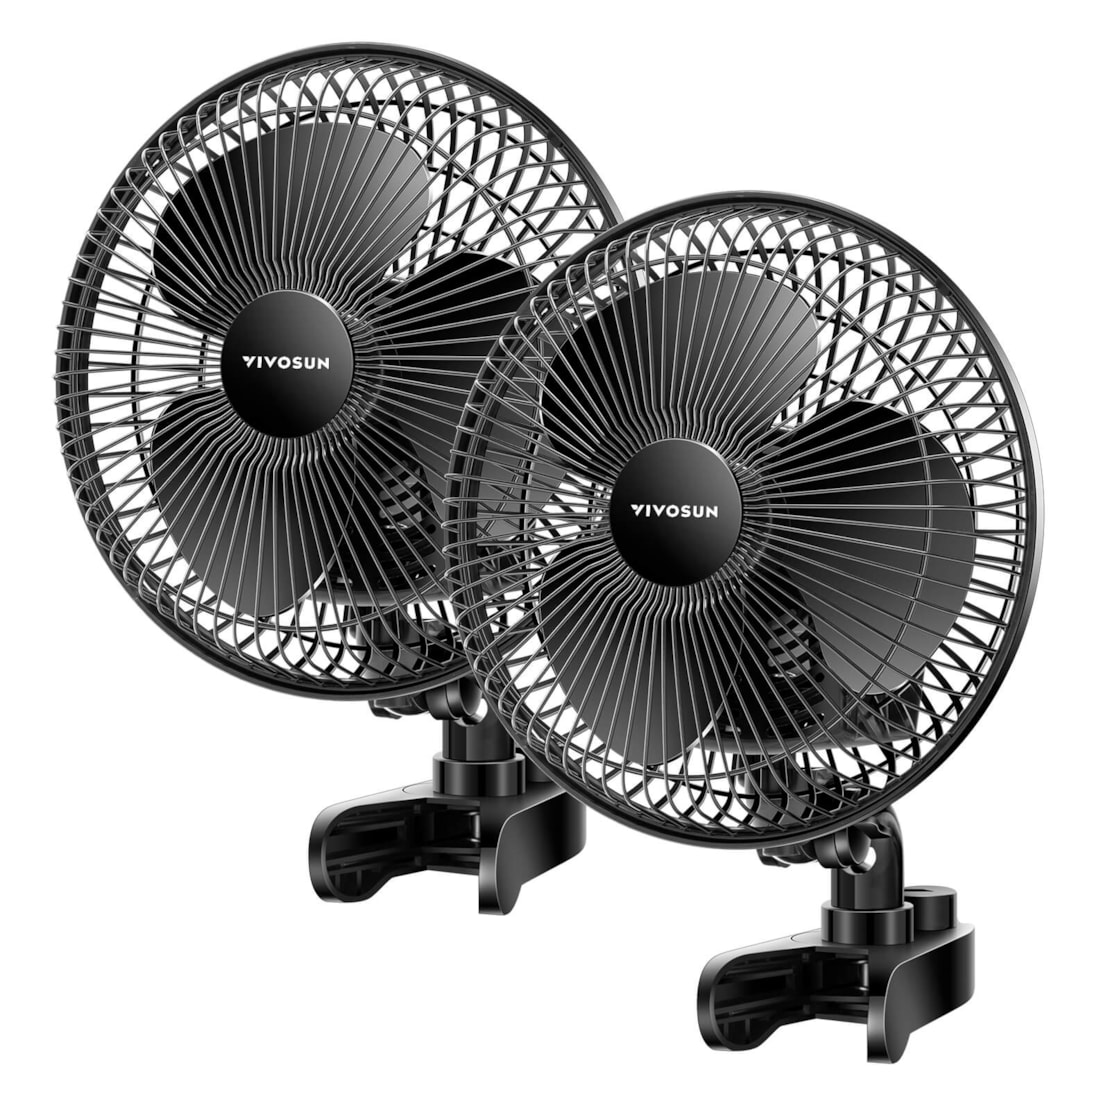 VIVOSUN AeroWave A6 Patented Clip-on Fan with 2-Speed Adjustment, 2 Pack - Black